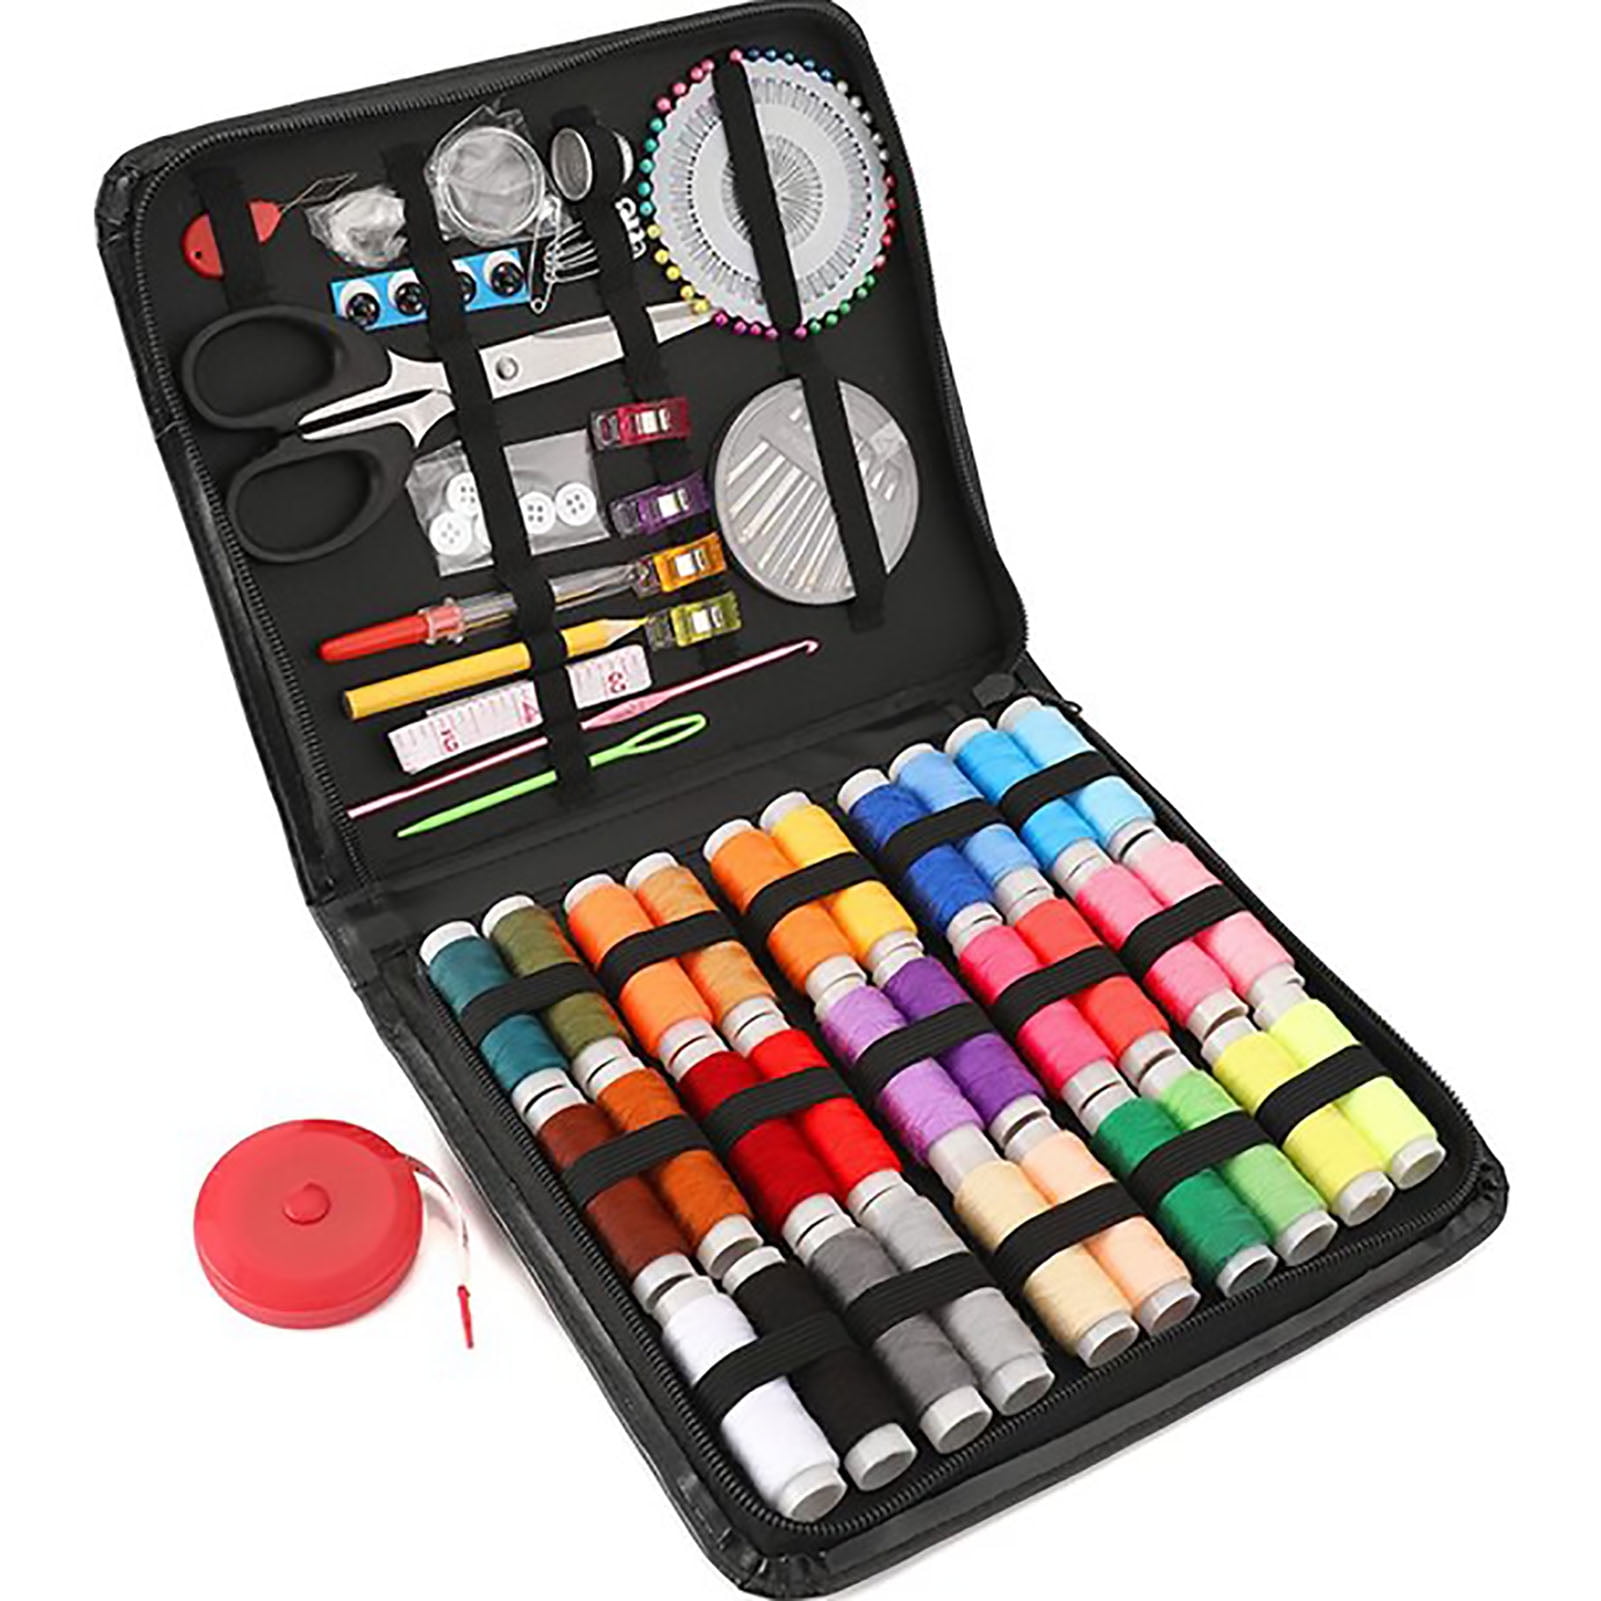 128 Pcs Portable Mini Sewing Kit for Beginner Sewing Kit Traveler and Emergency Clothing Fixes,DIY Sewing Supplies Include Sewing Needles,Sewing Thread,Scissors,Tape Measure etc 